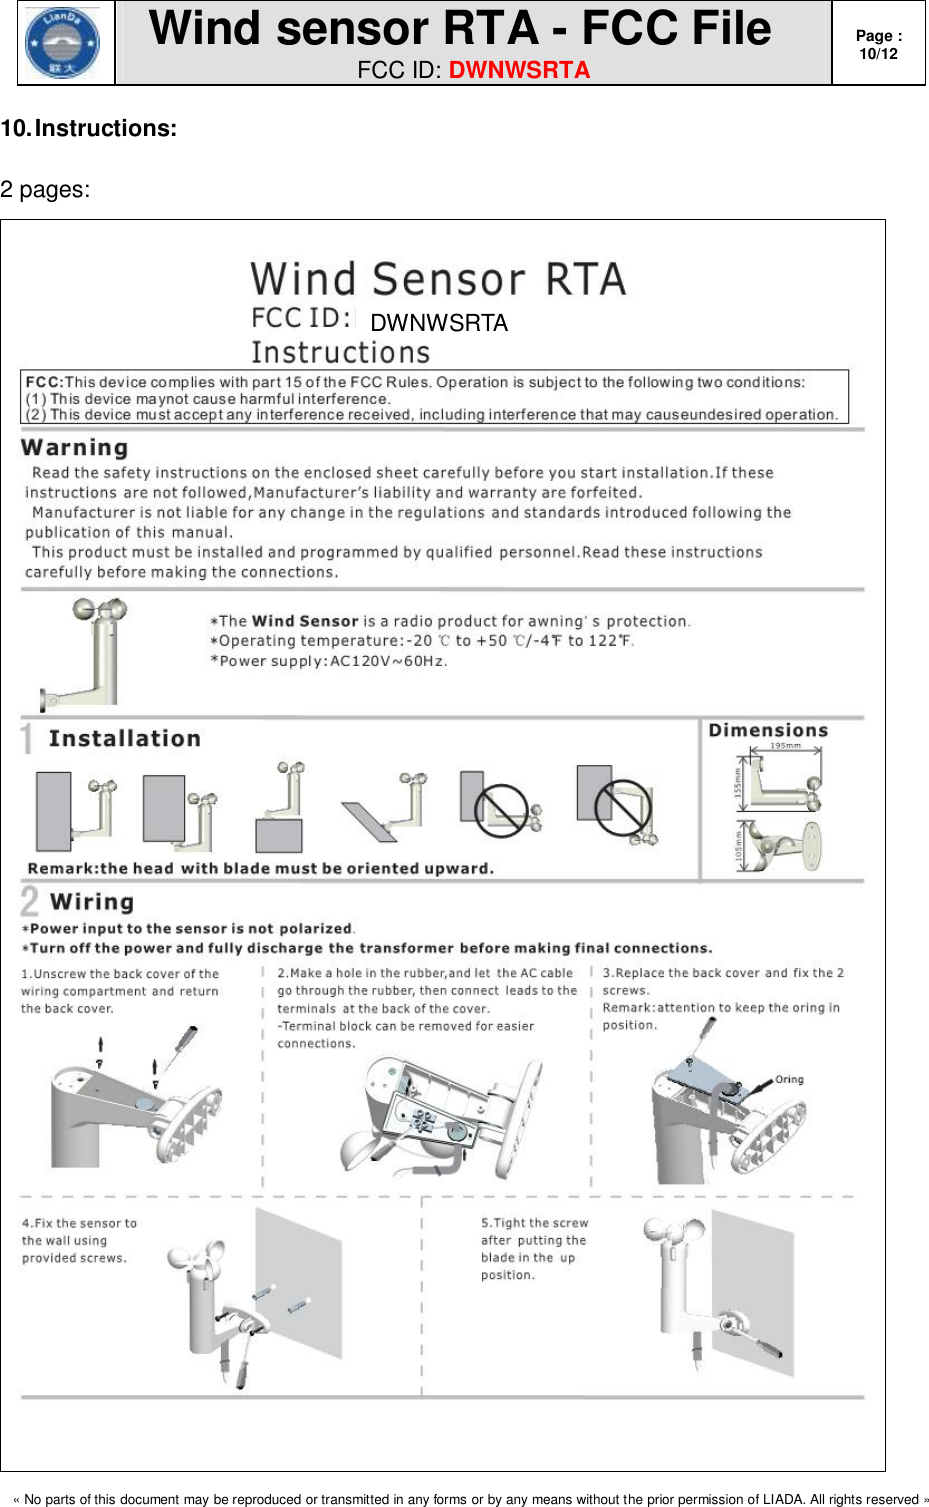  Wind sensor RTA - FCC File FCC ID: DWNWSRTA Page : 10/12  « No parts of this document may be reproduced or transmitted in any forms or by any means without the prior permission of LIADA. All rights reserved »   10. Instructions:  2 pages:  DWNWSRTA 